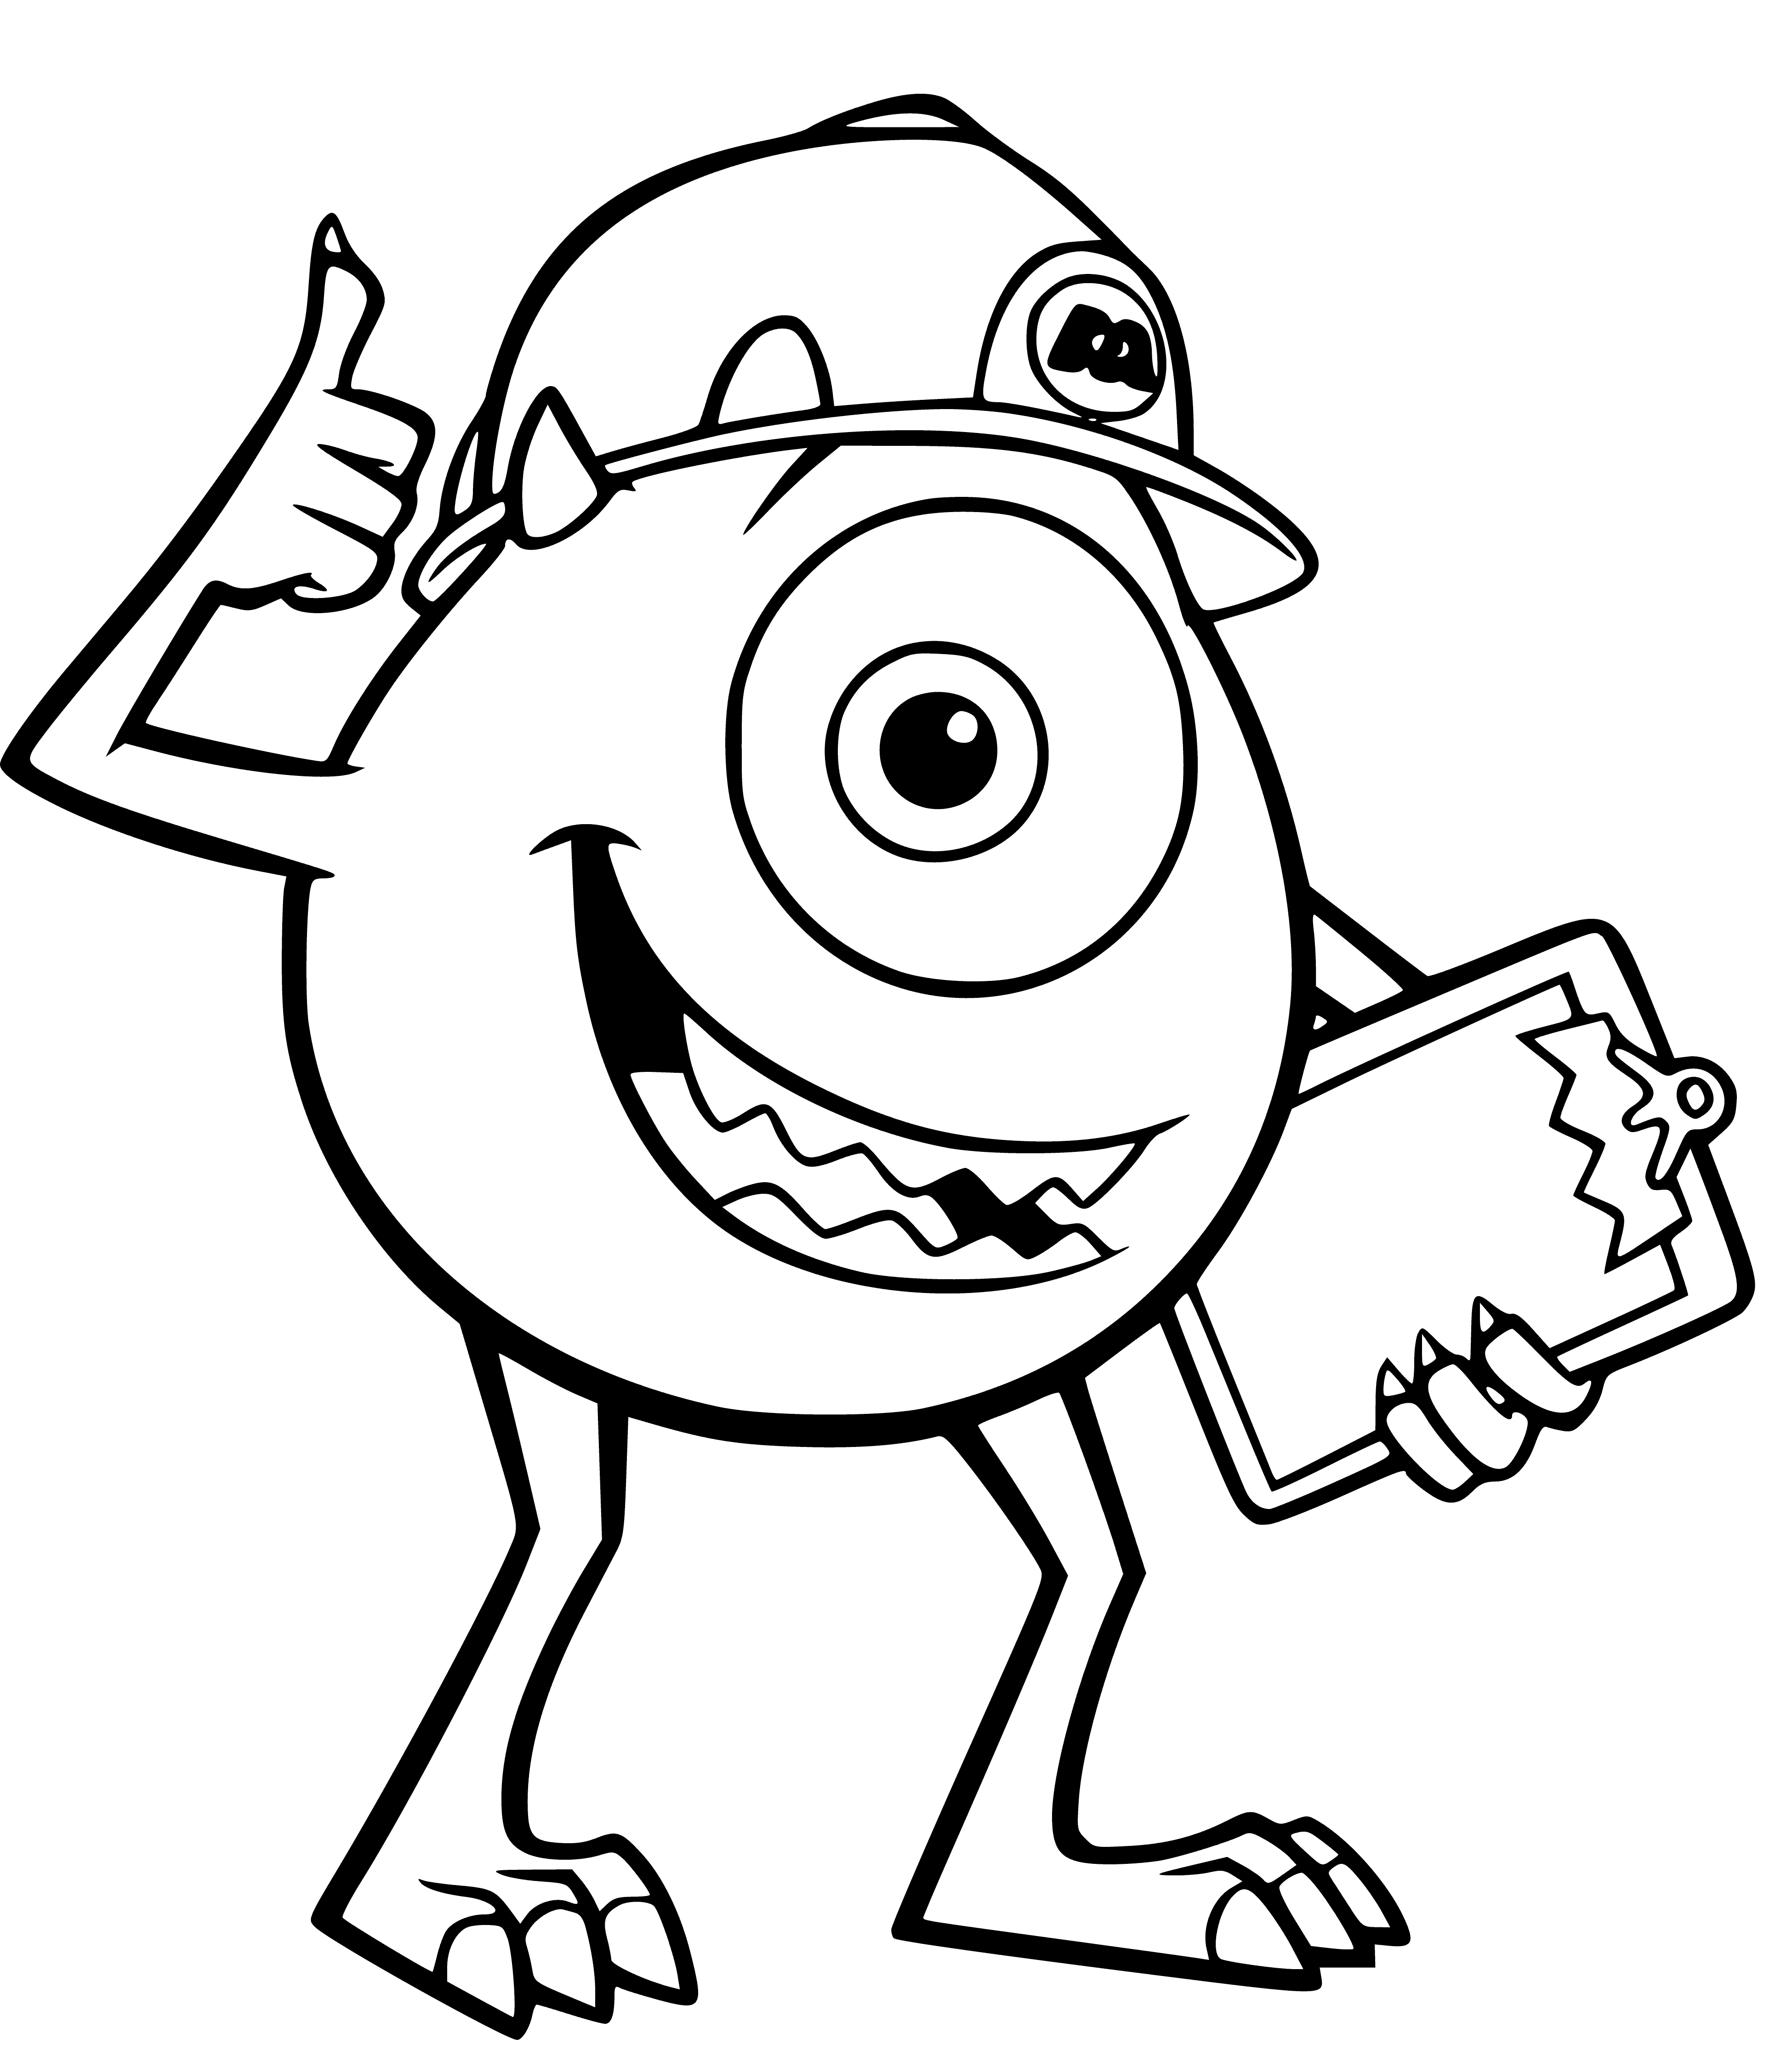 Mike Wazovsky coloring page